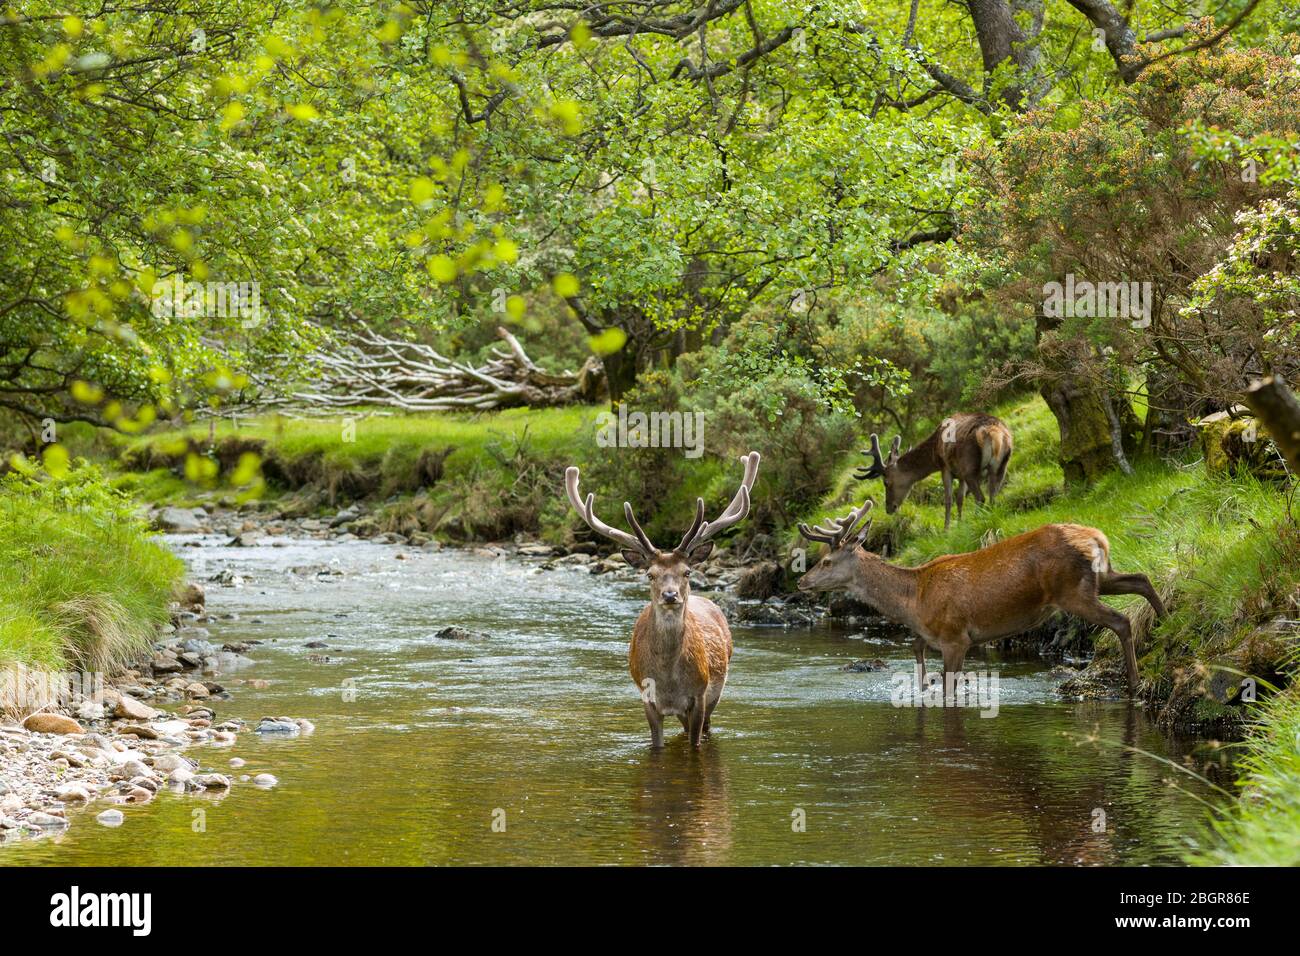 Red Deer stag, Cervus elaphus, adult mature male with large antlers beside young males in river scene at Lochranza, Isle of Arran, Scotland Stock Photo